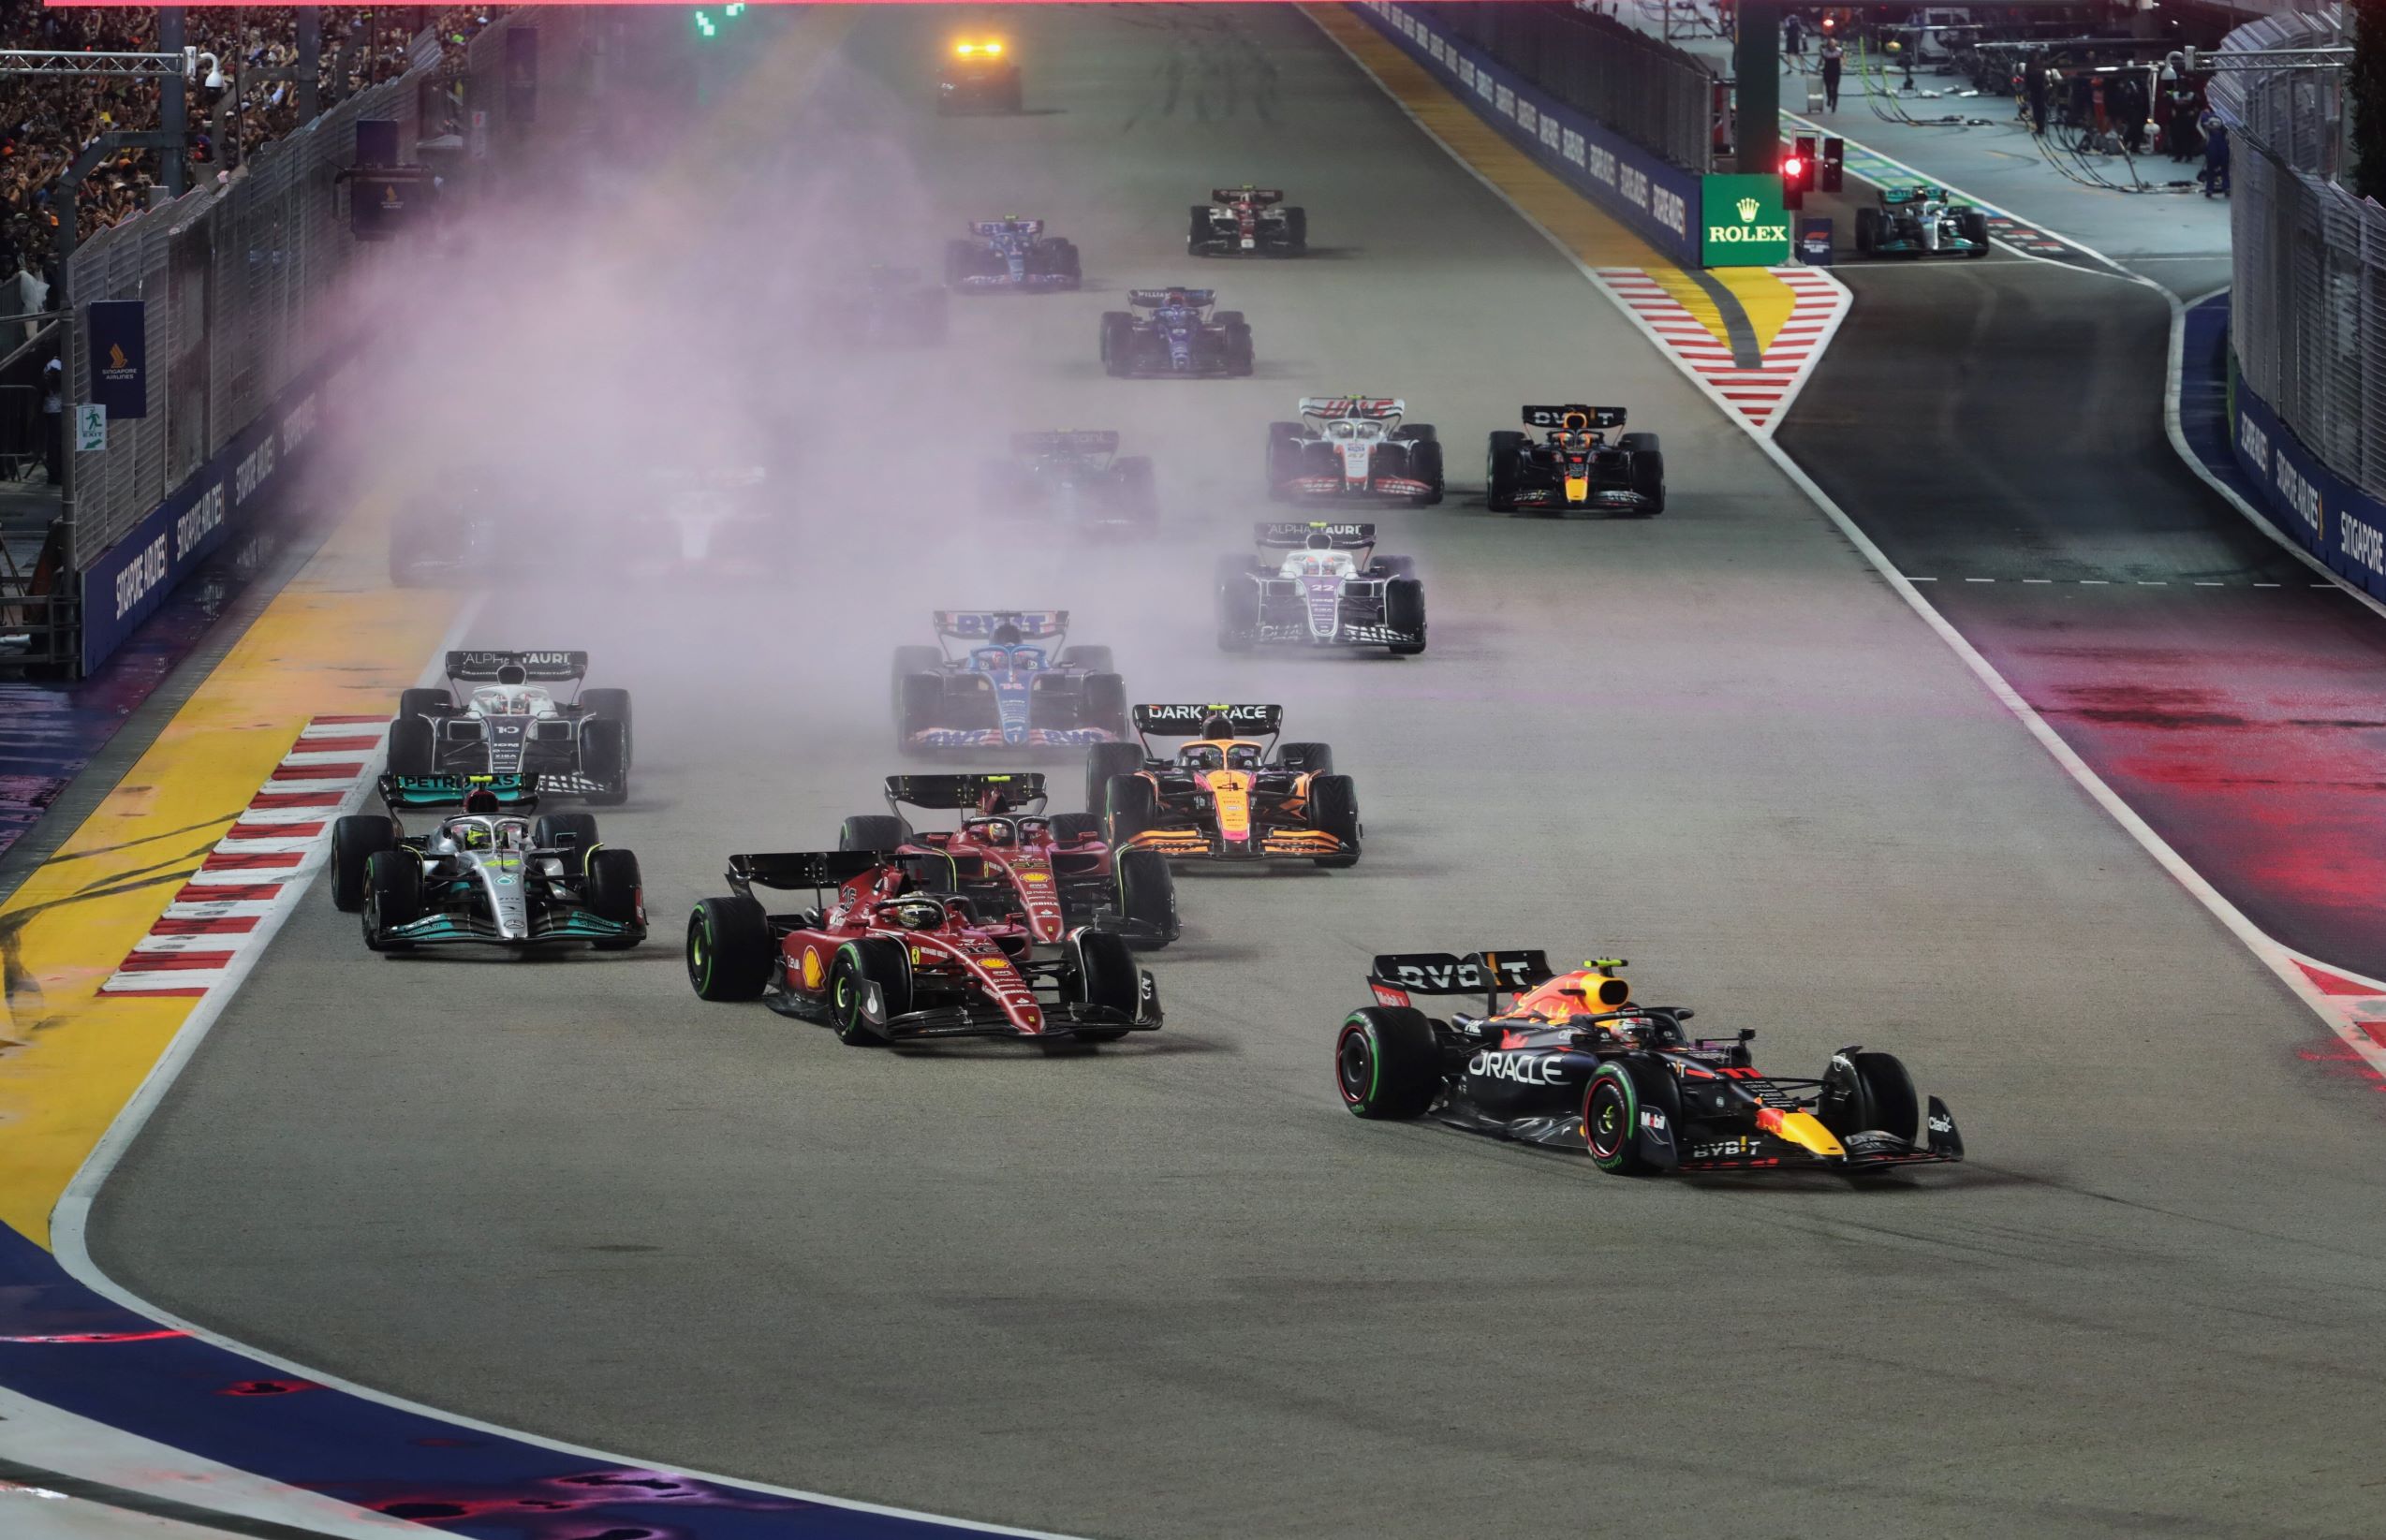 Formula 1 and beIN SPORTS announce multi-year partnership to exclusively broadcast F1 in 10 territories across Asia Formula One World Championship Limited